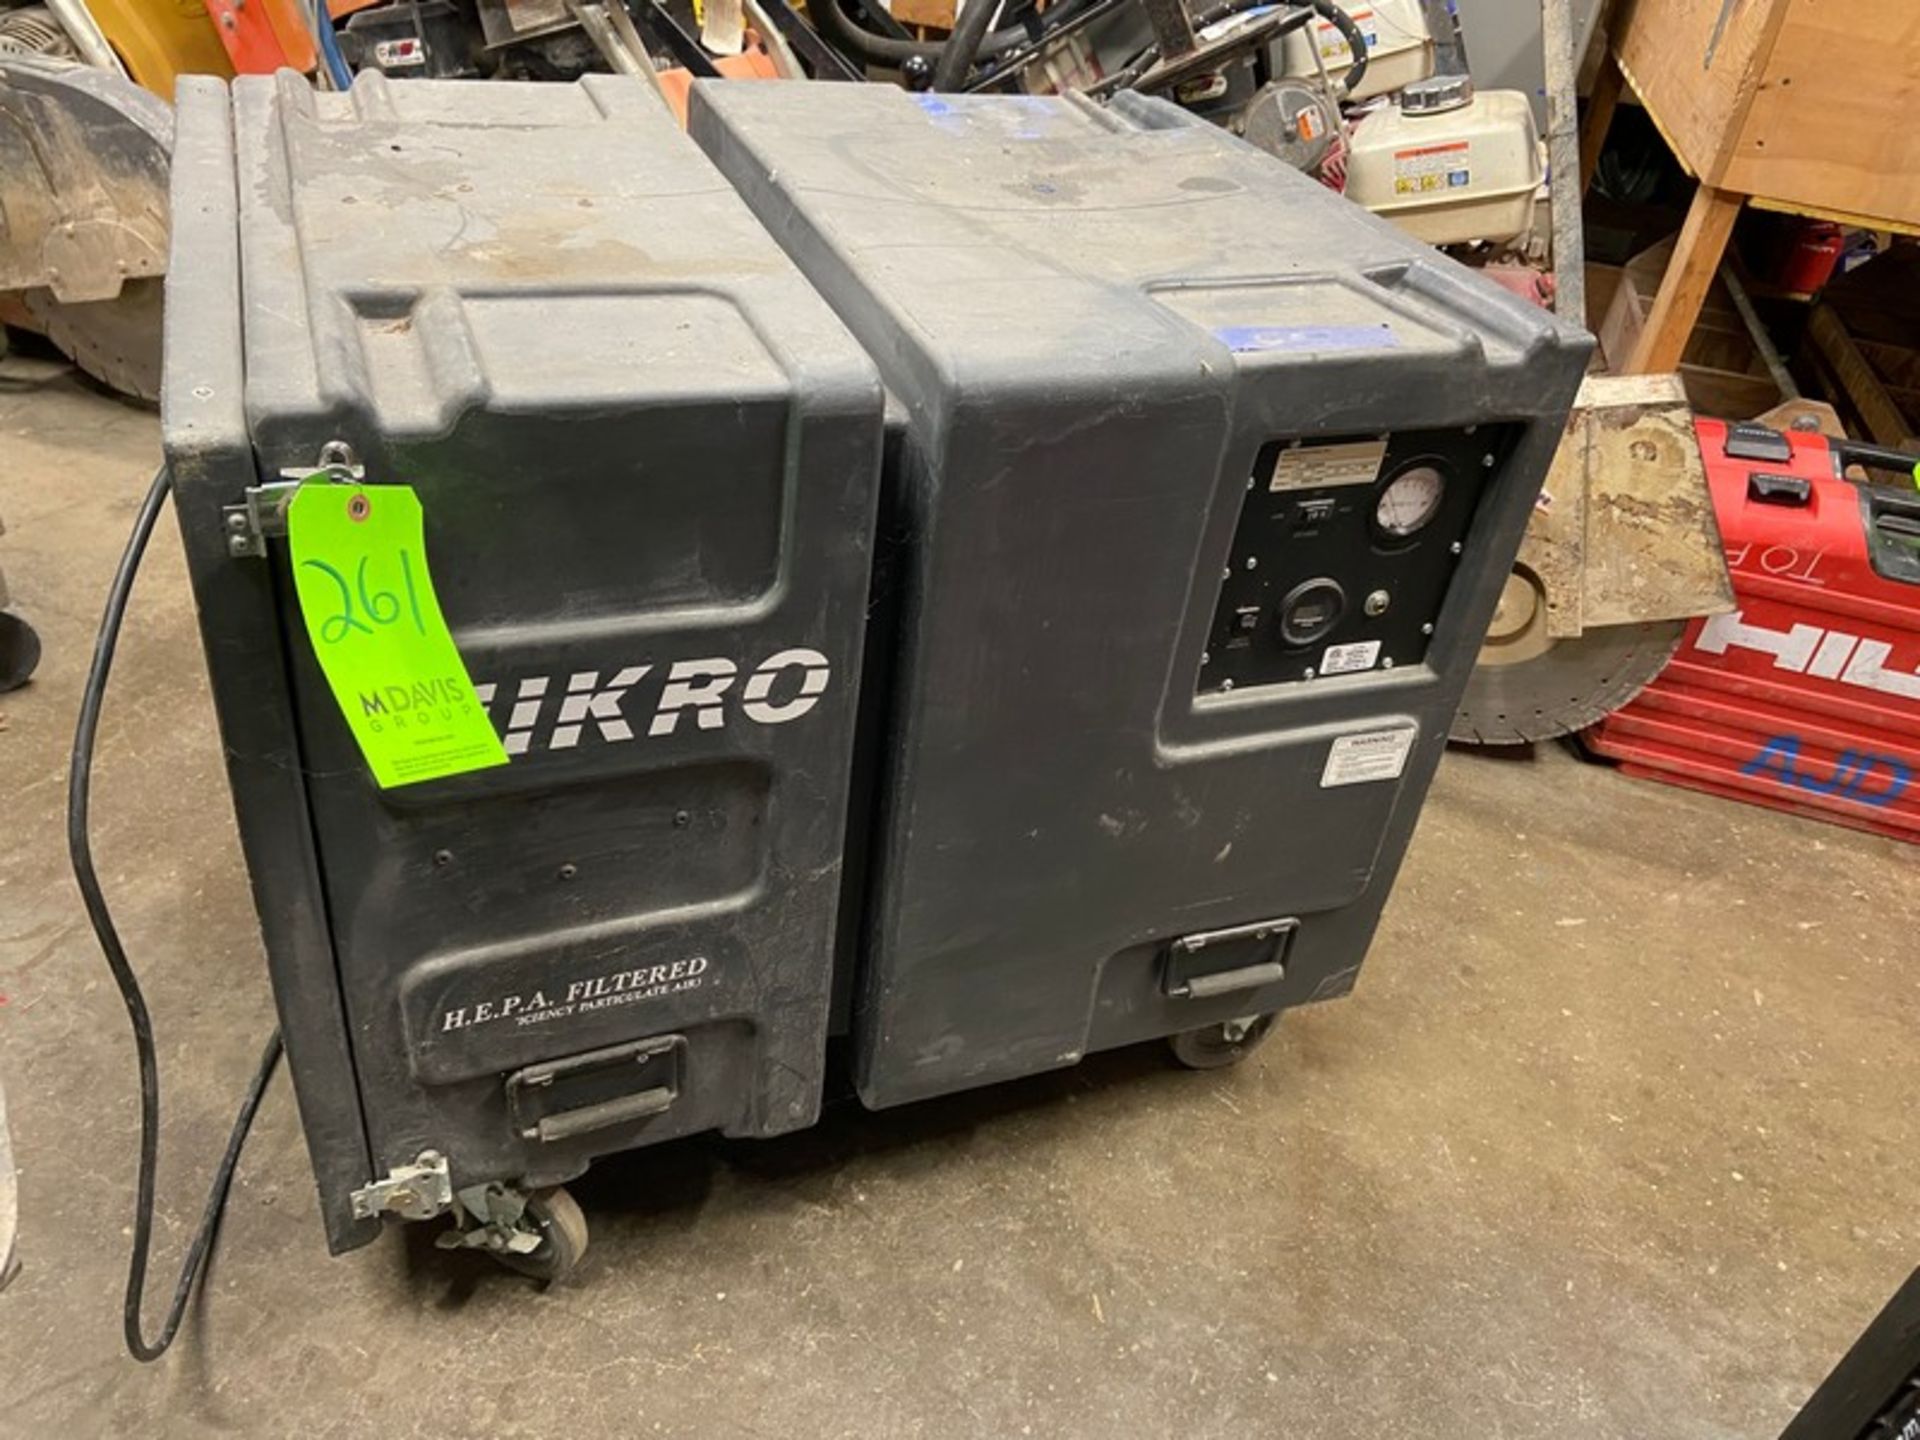 NIKRO H.E.P.A. Filter, M/N PS2009, S/N E401556, with Filters, 115 Volts, Mounted on Casters (LOCATED